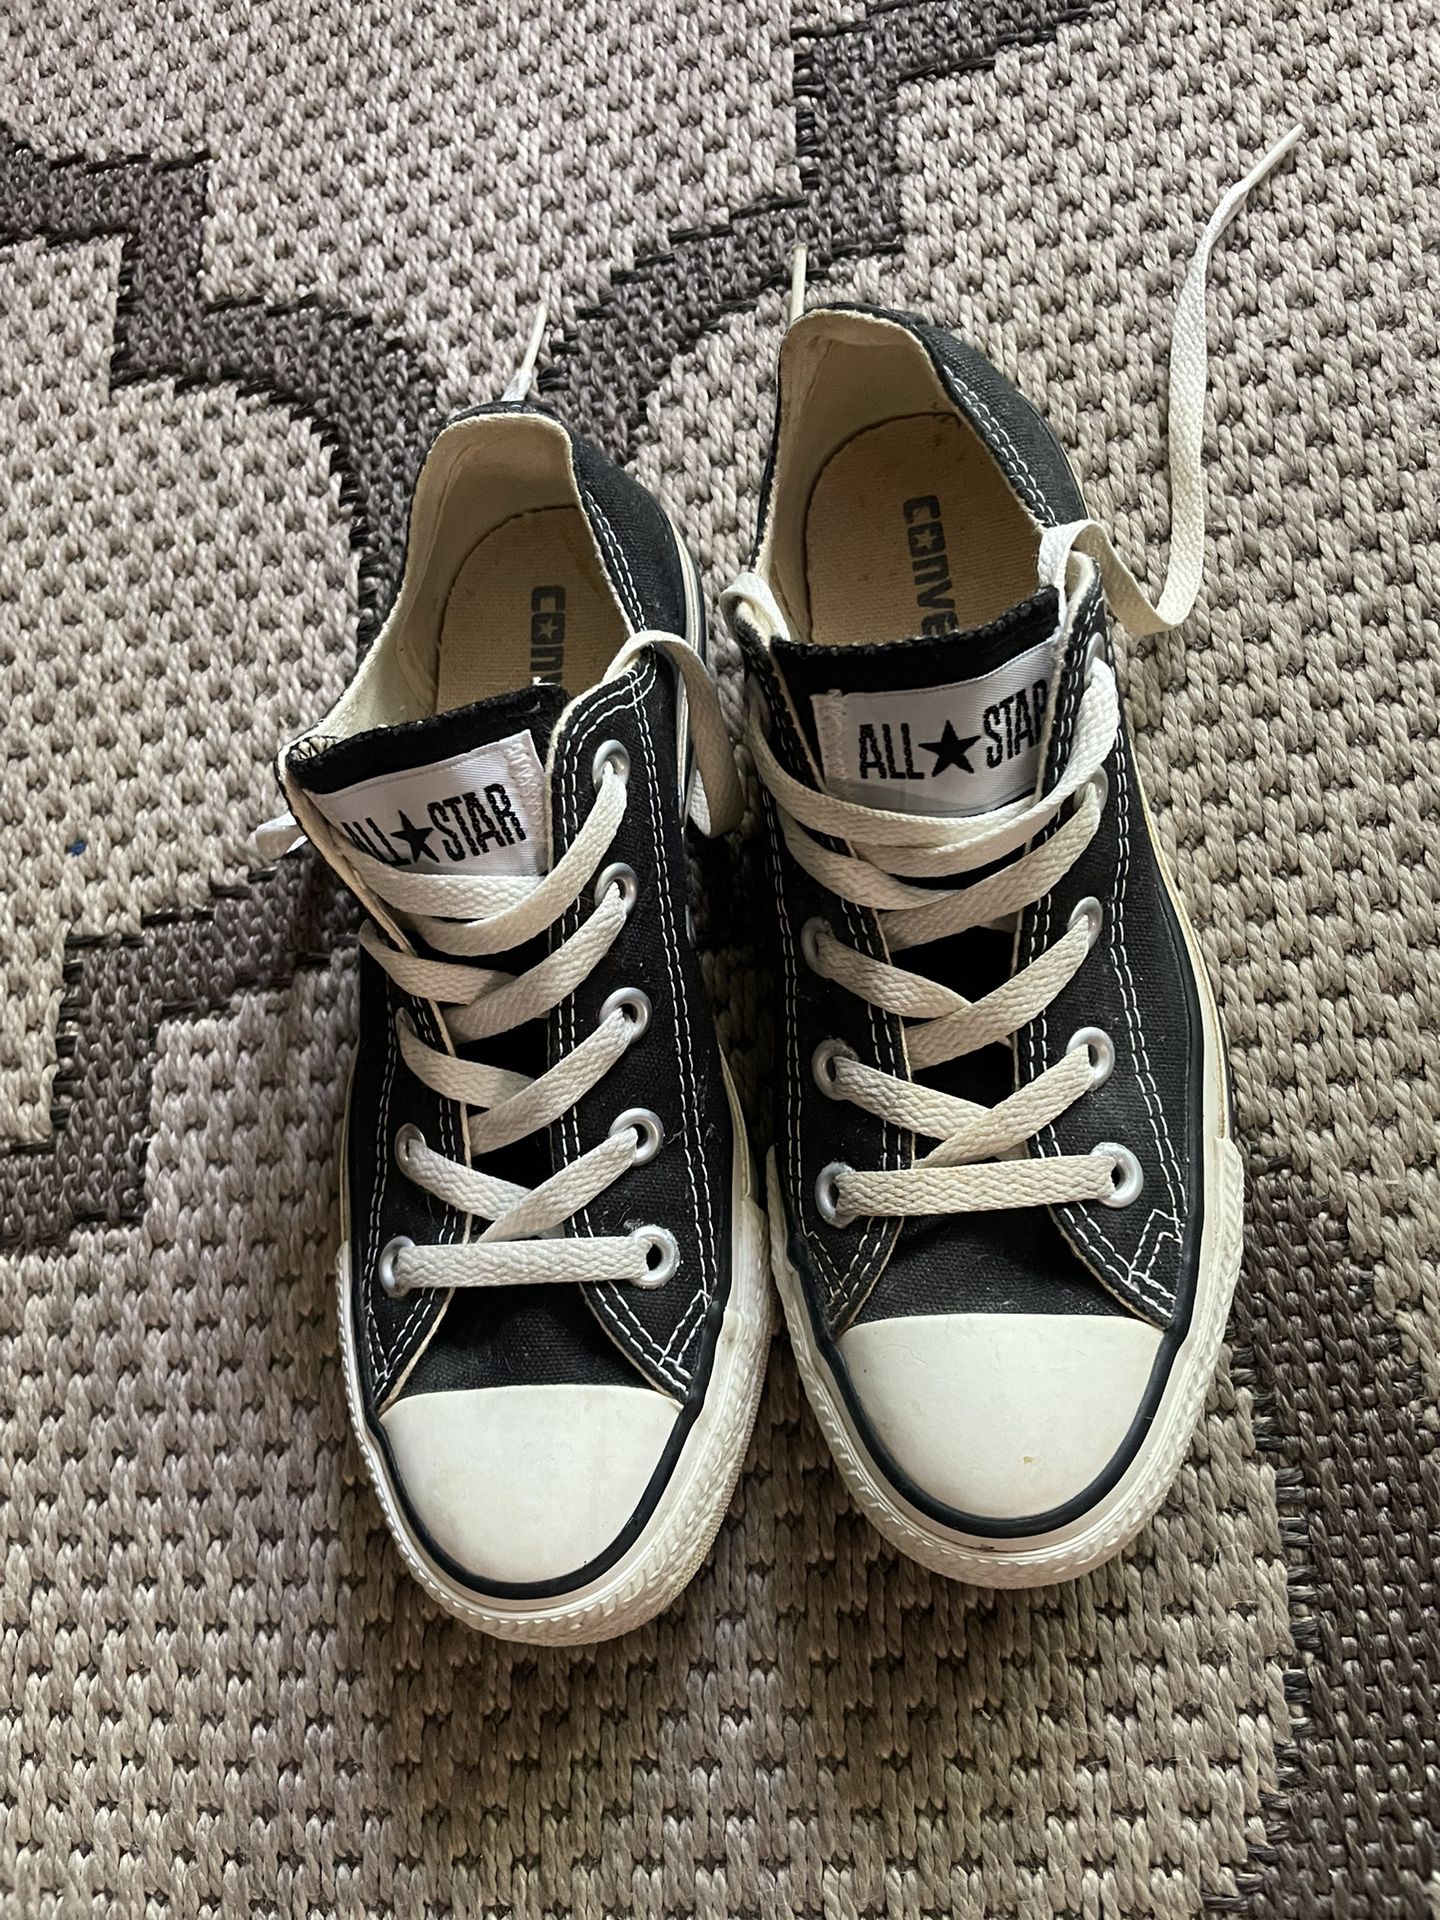 Converse Black And White Shoes